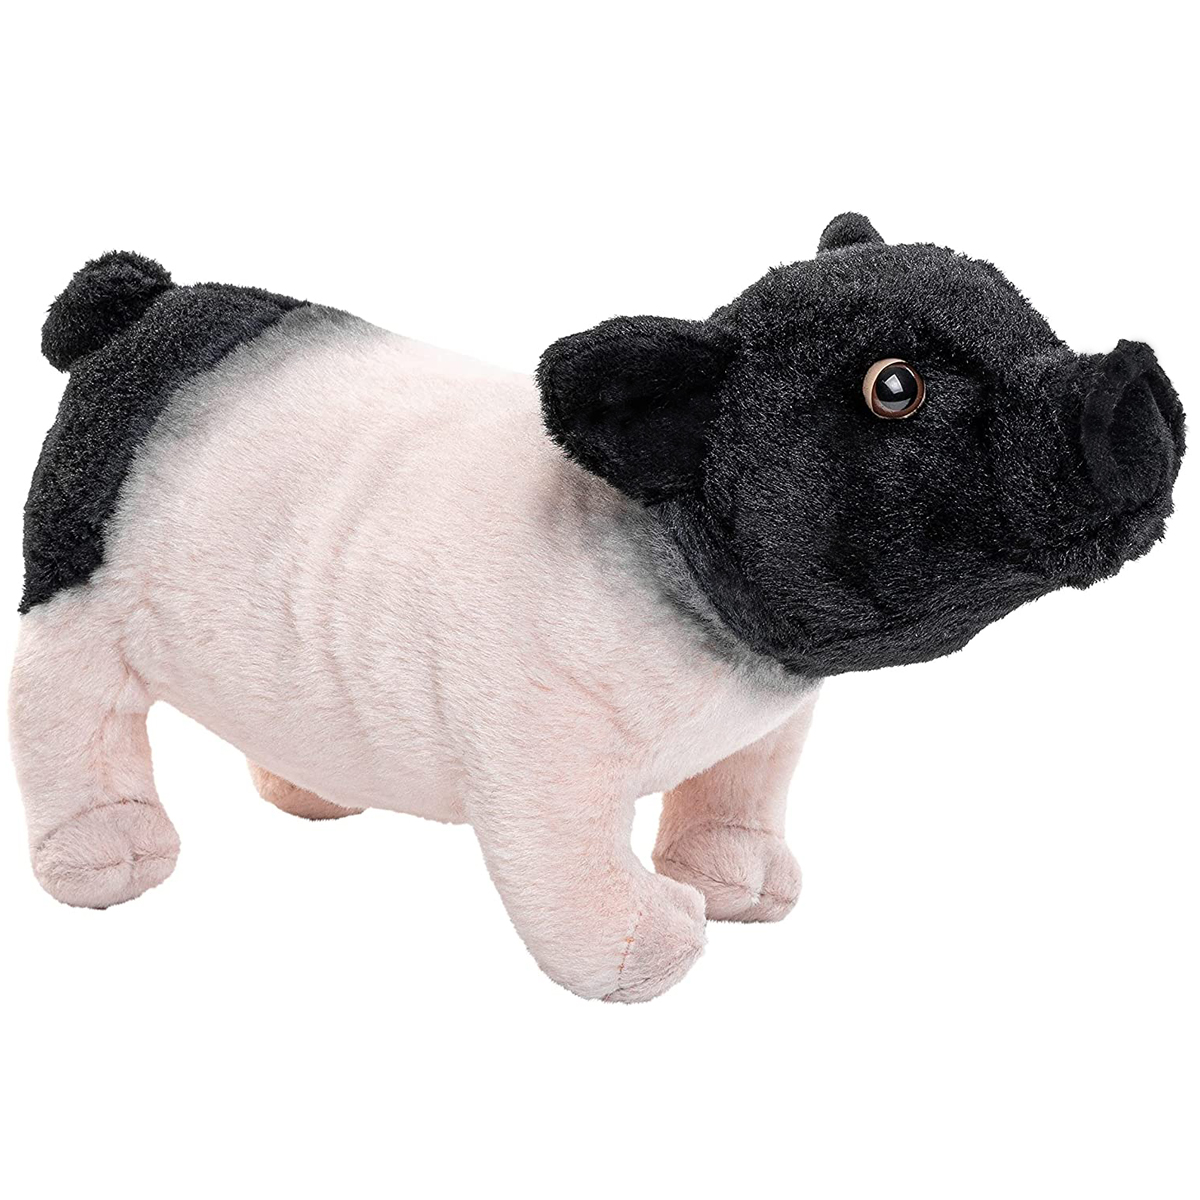 PIG BLACK AND PINK PLUSH 20cm SOFT CUDDLY FLUFFY REALISTIC TOY PIGLET